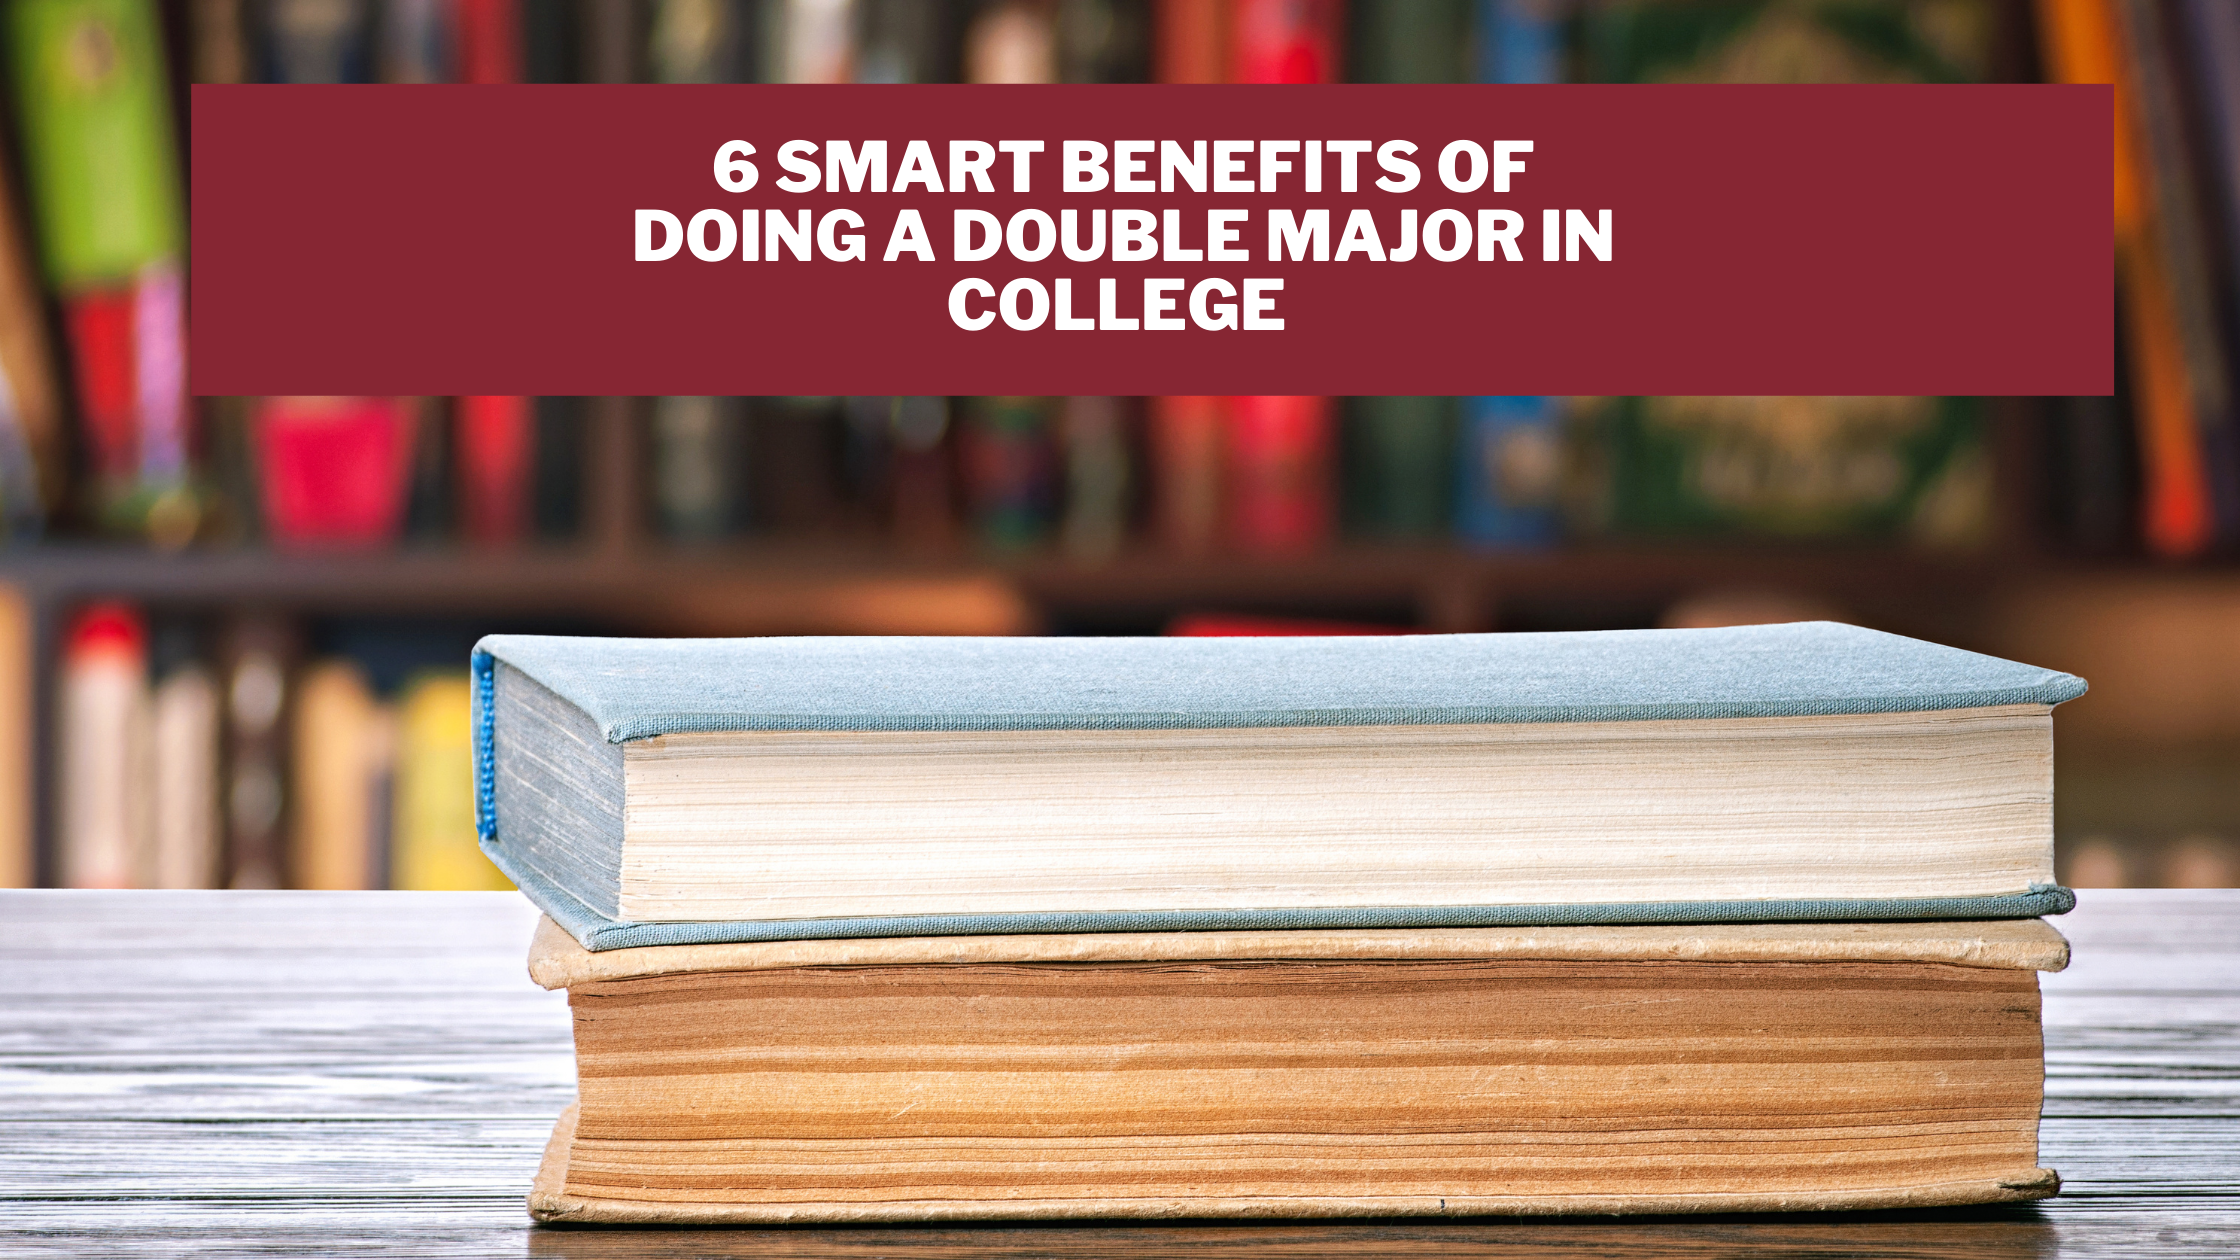 Image of 6 Smart Benefits of Doing a Double Major in College  